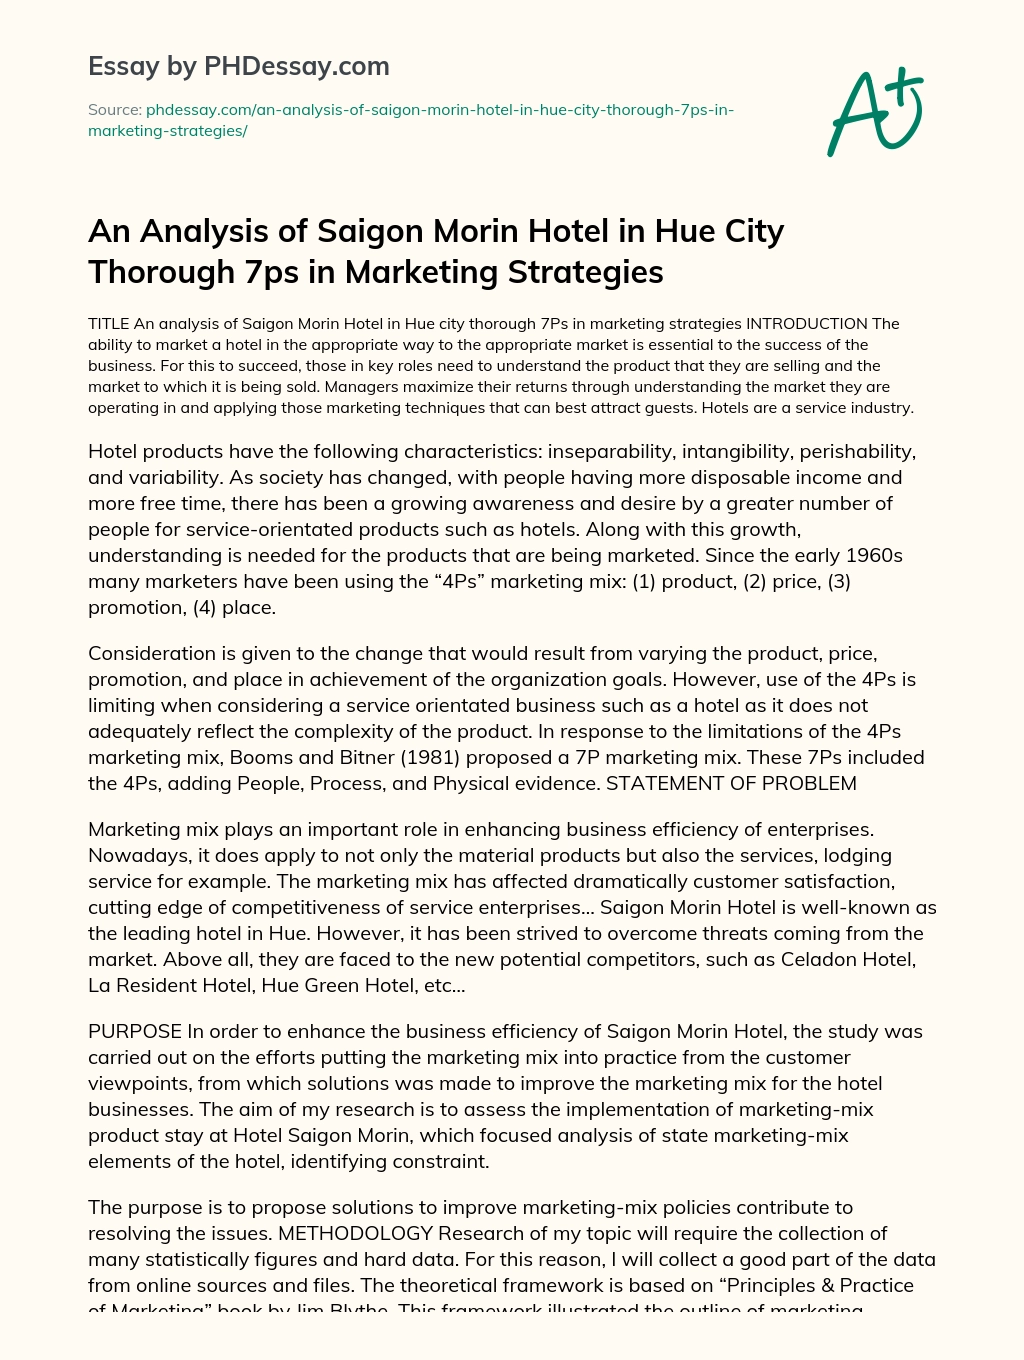 An Analysis of Saigon Morin Hotel in Hue City Thorough 7ps in Marketing Strategies essay